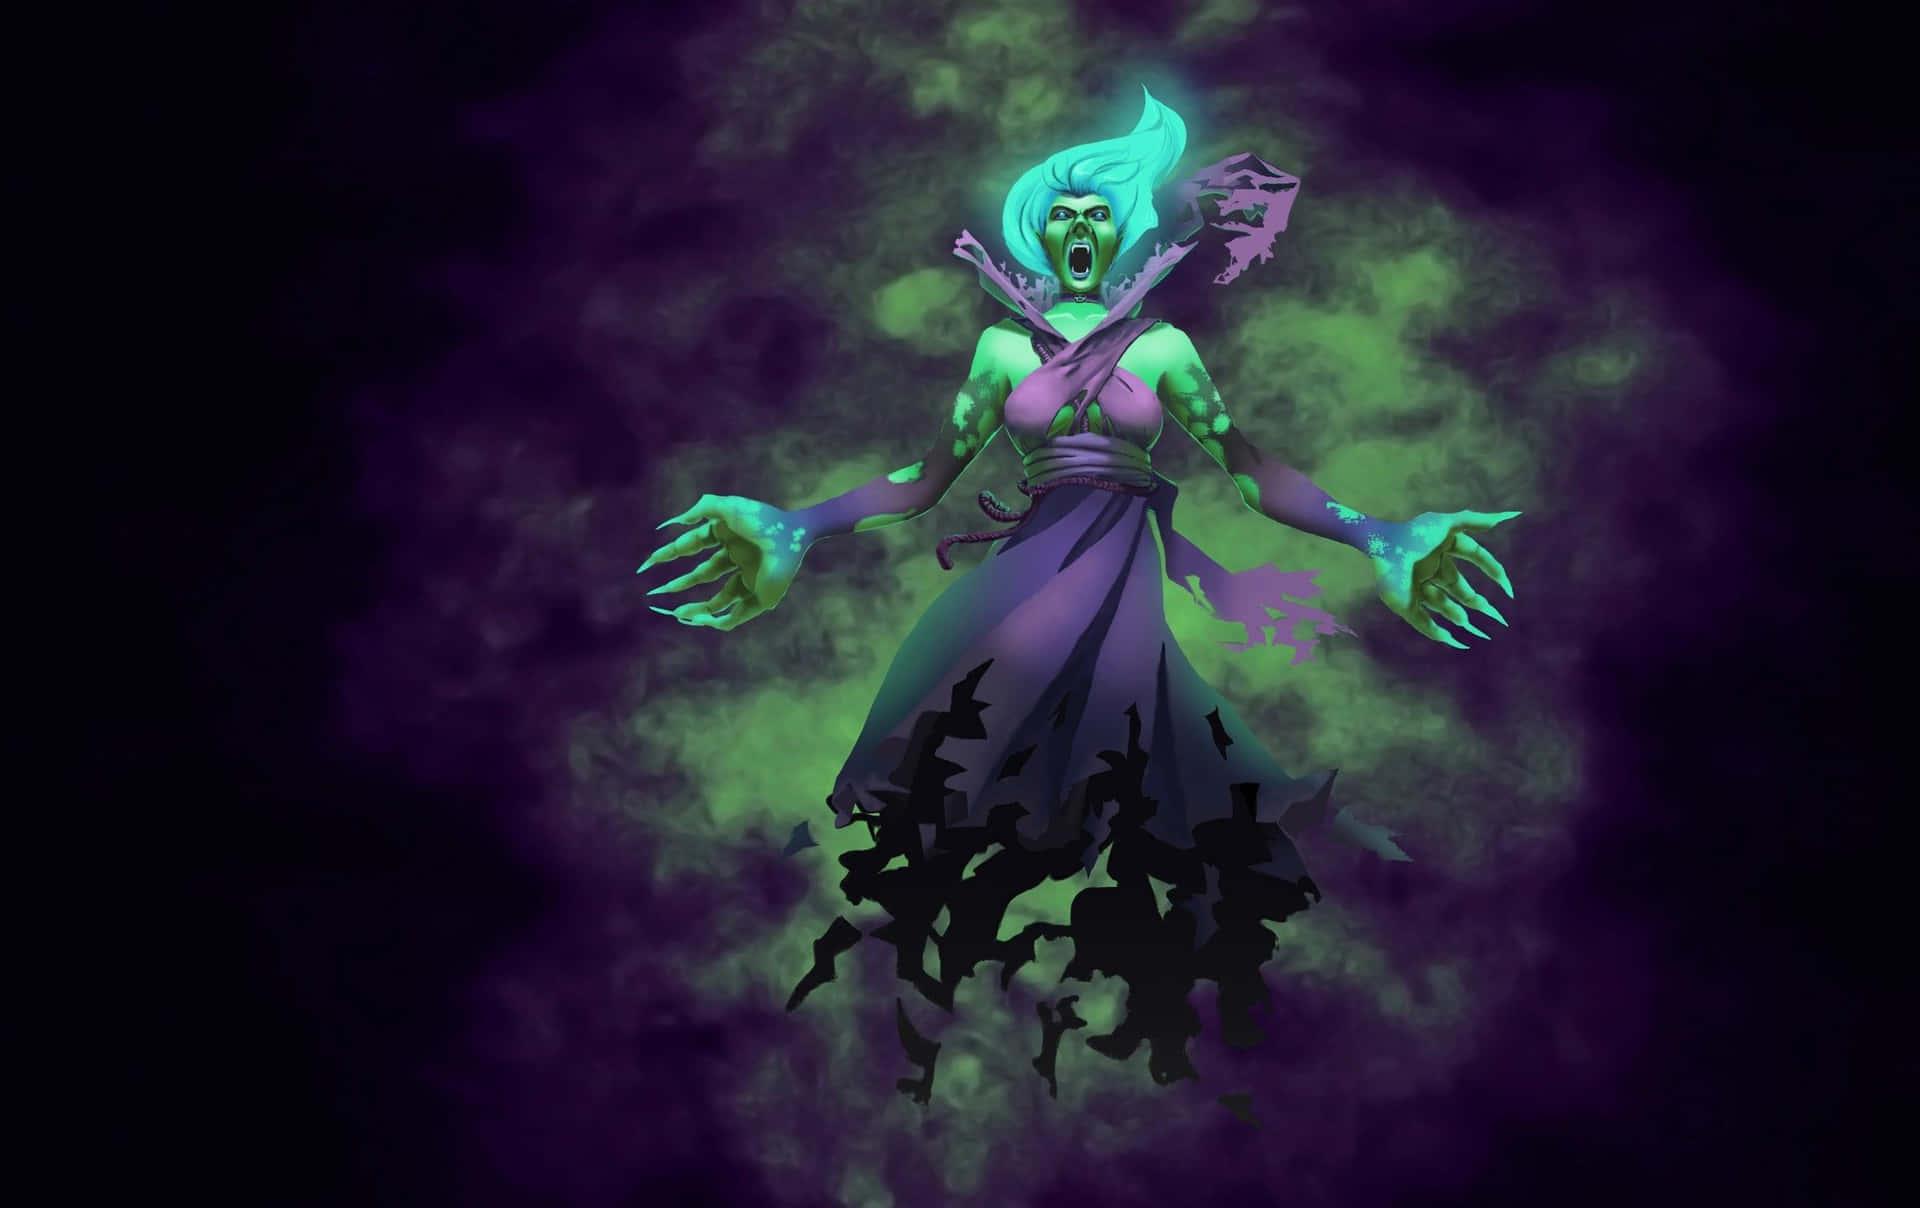 A fearsome evil witch casting a dark spell in the night. Wallpaper